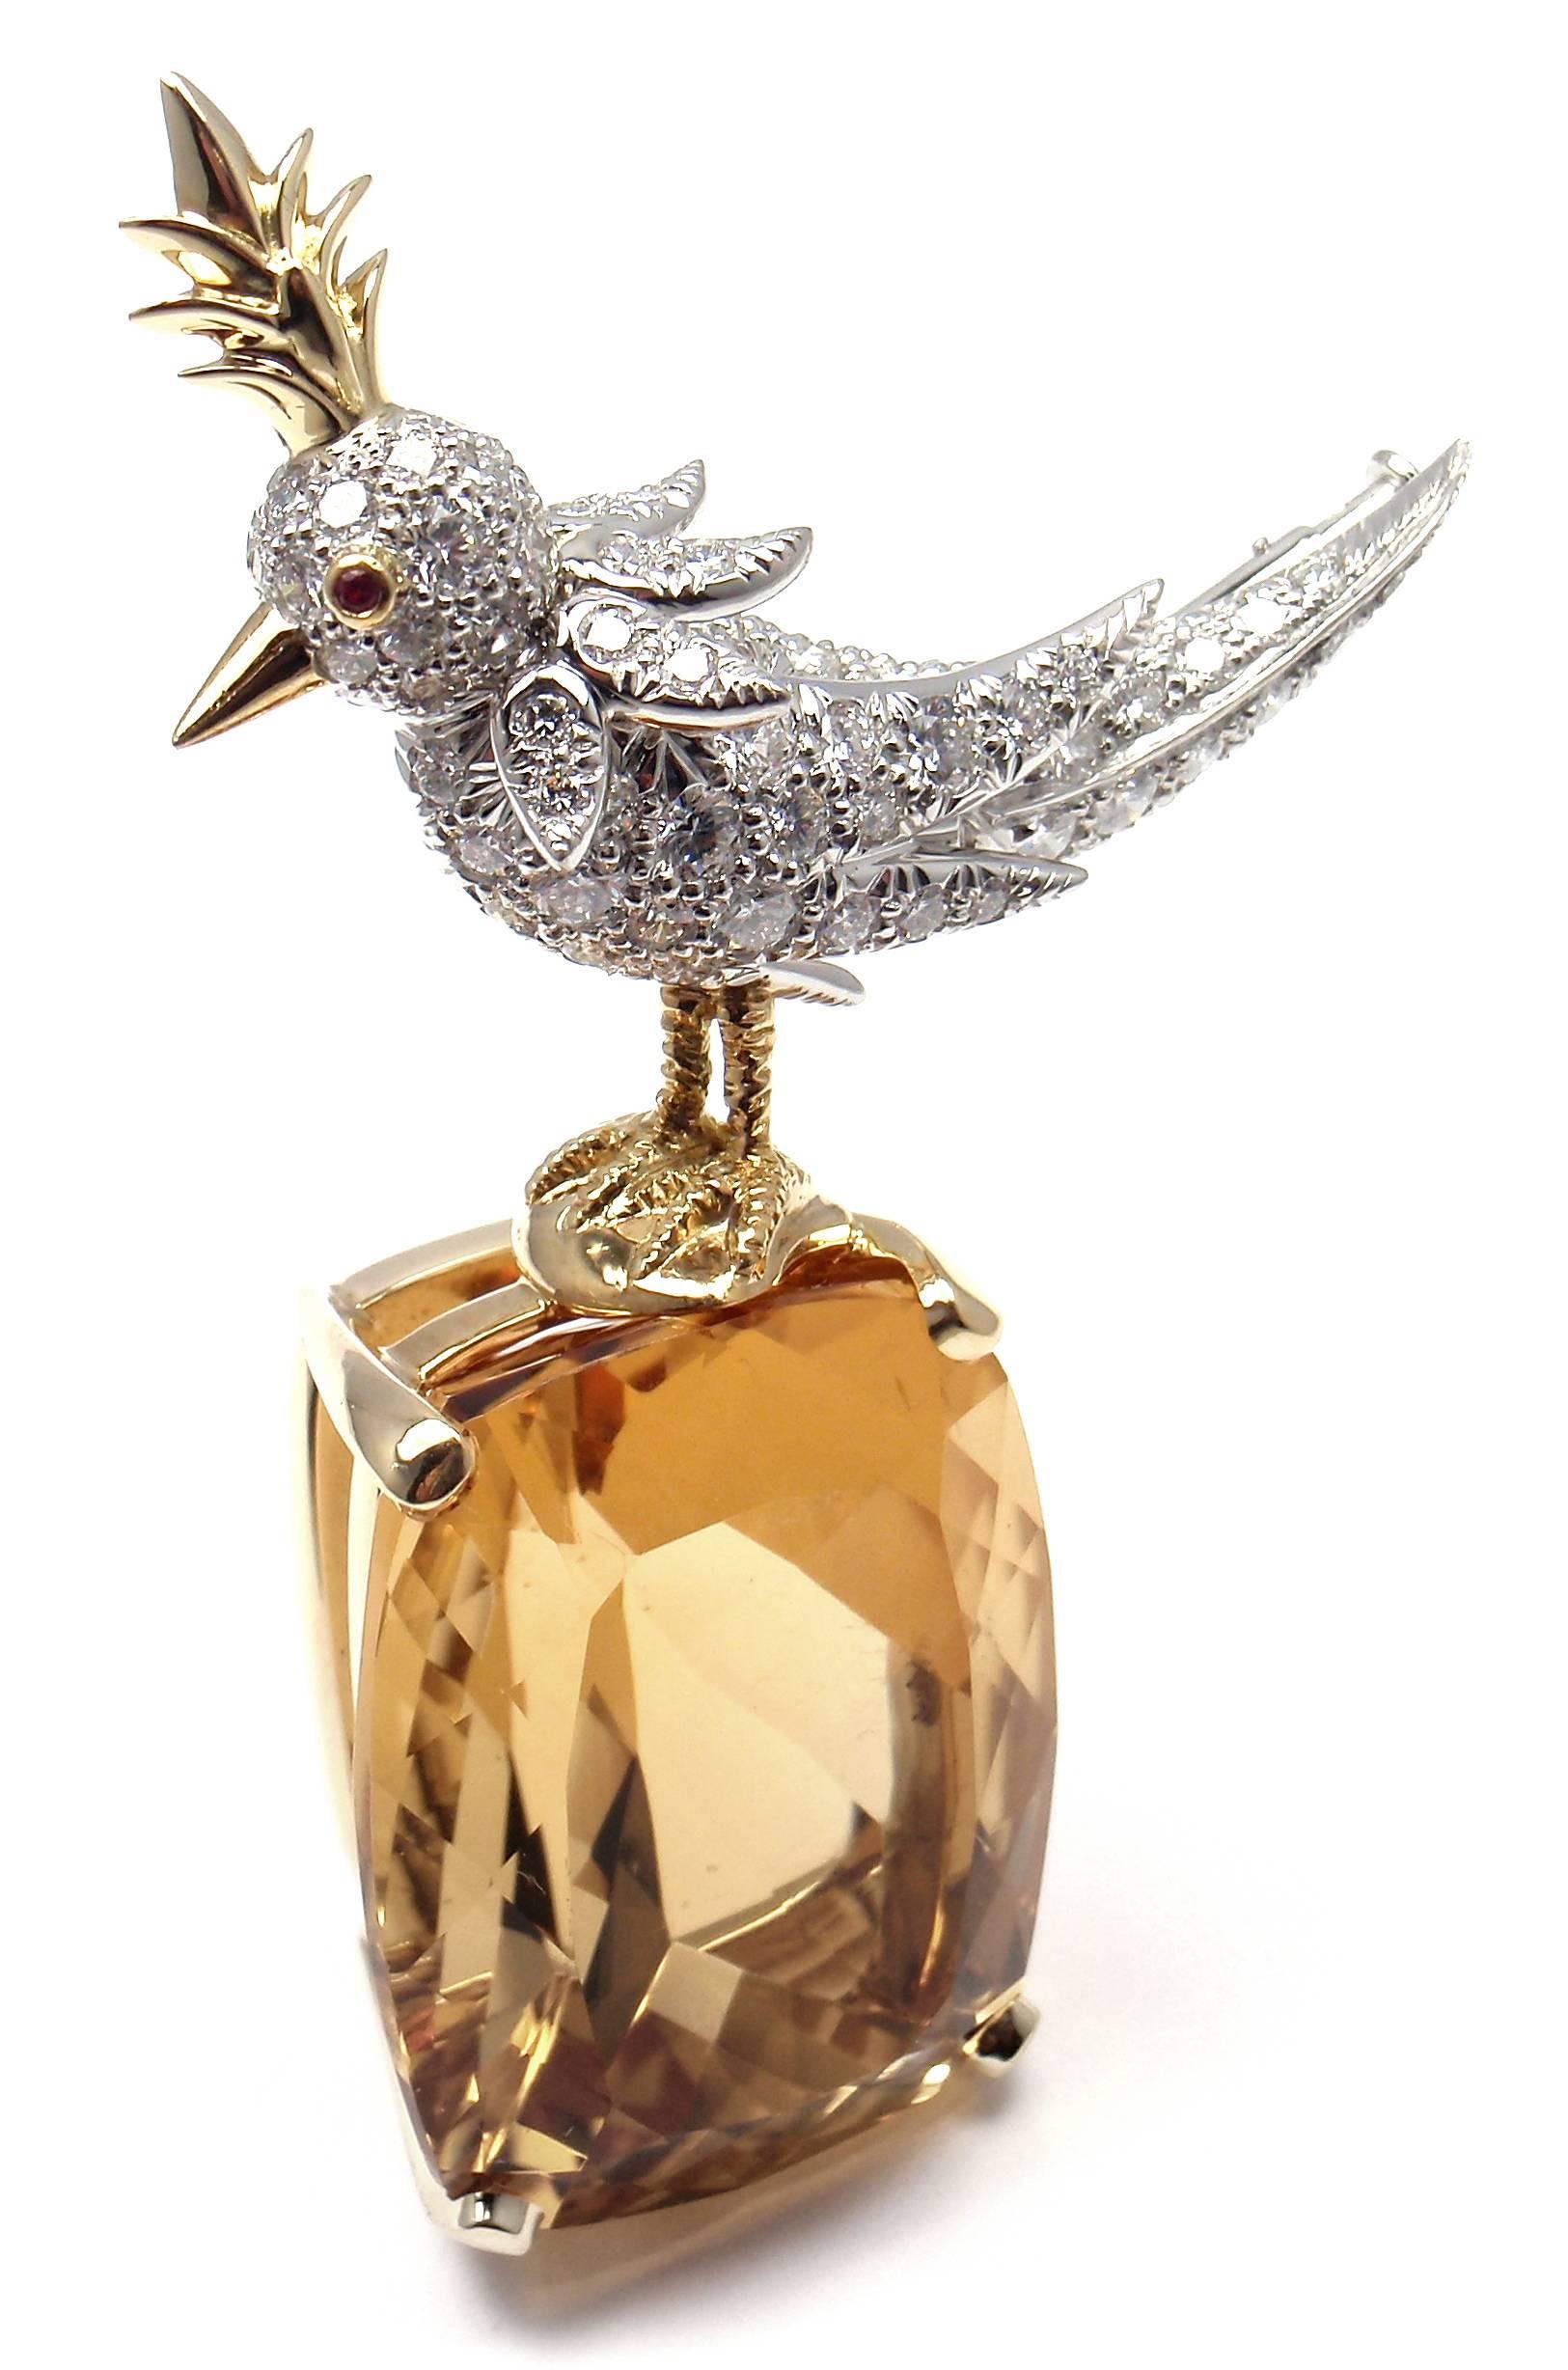 18k Yellow Gold and Platinum Diamond & Citrine Bird-on-a-Rock Brooch by Jean Schlumberger for Tiffany & Co.
This brooch comes with original Tiffany & Co box.
With round brilliant cut diamonds VVS1 clarity, E color total weight approx. 2.80ct and